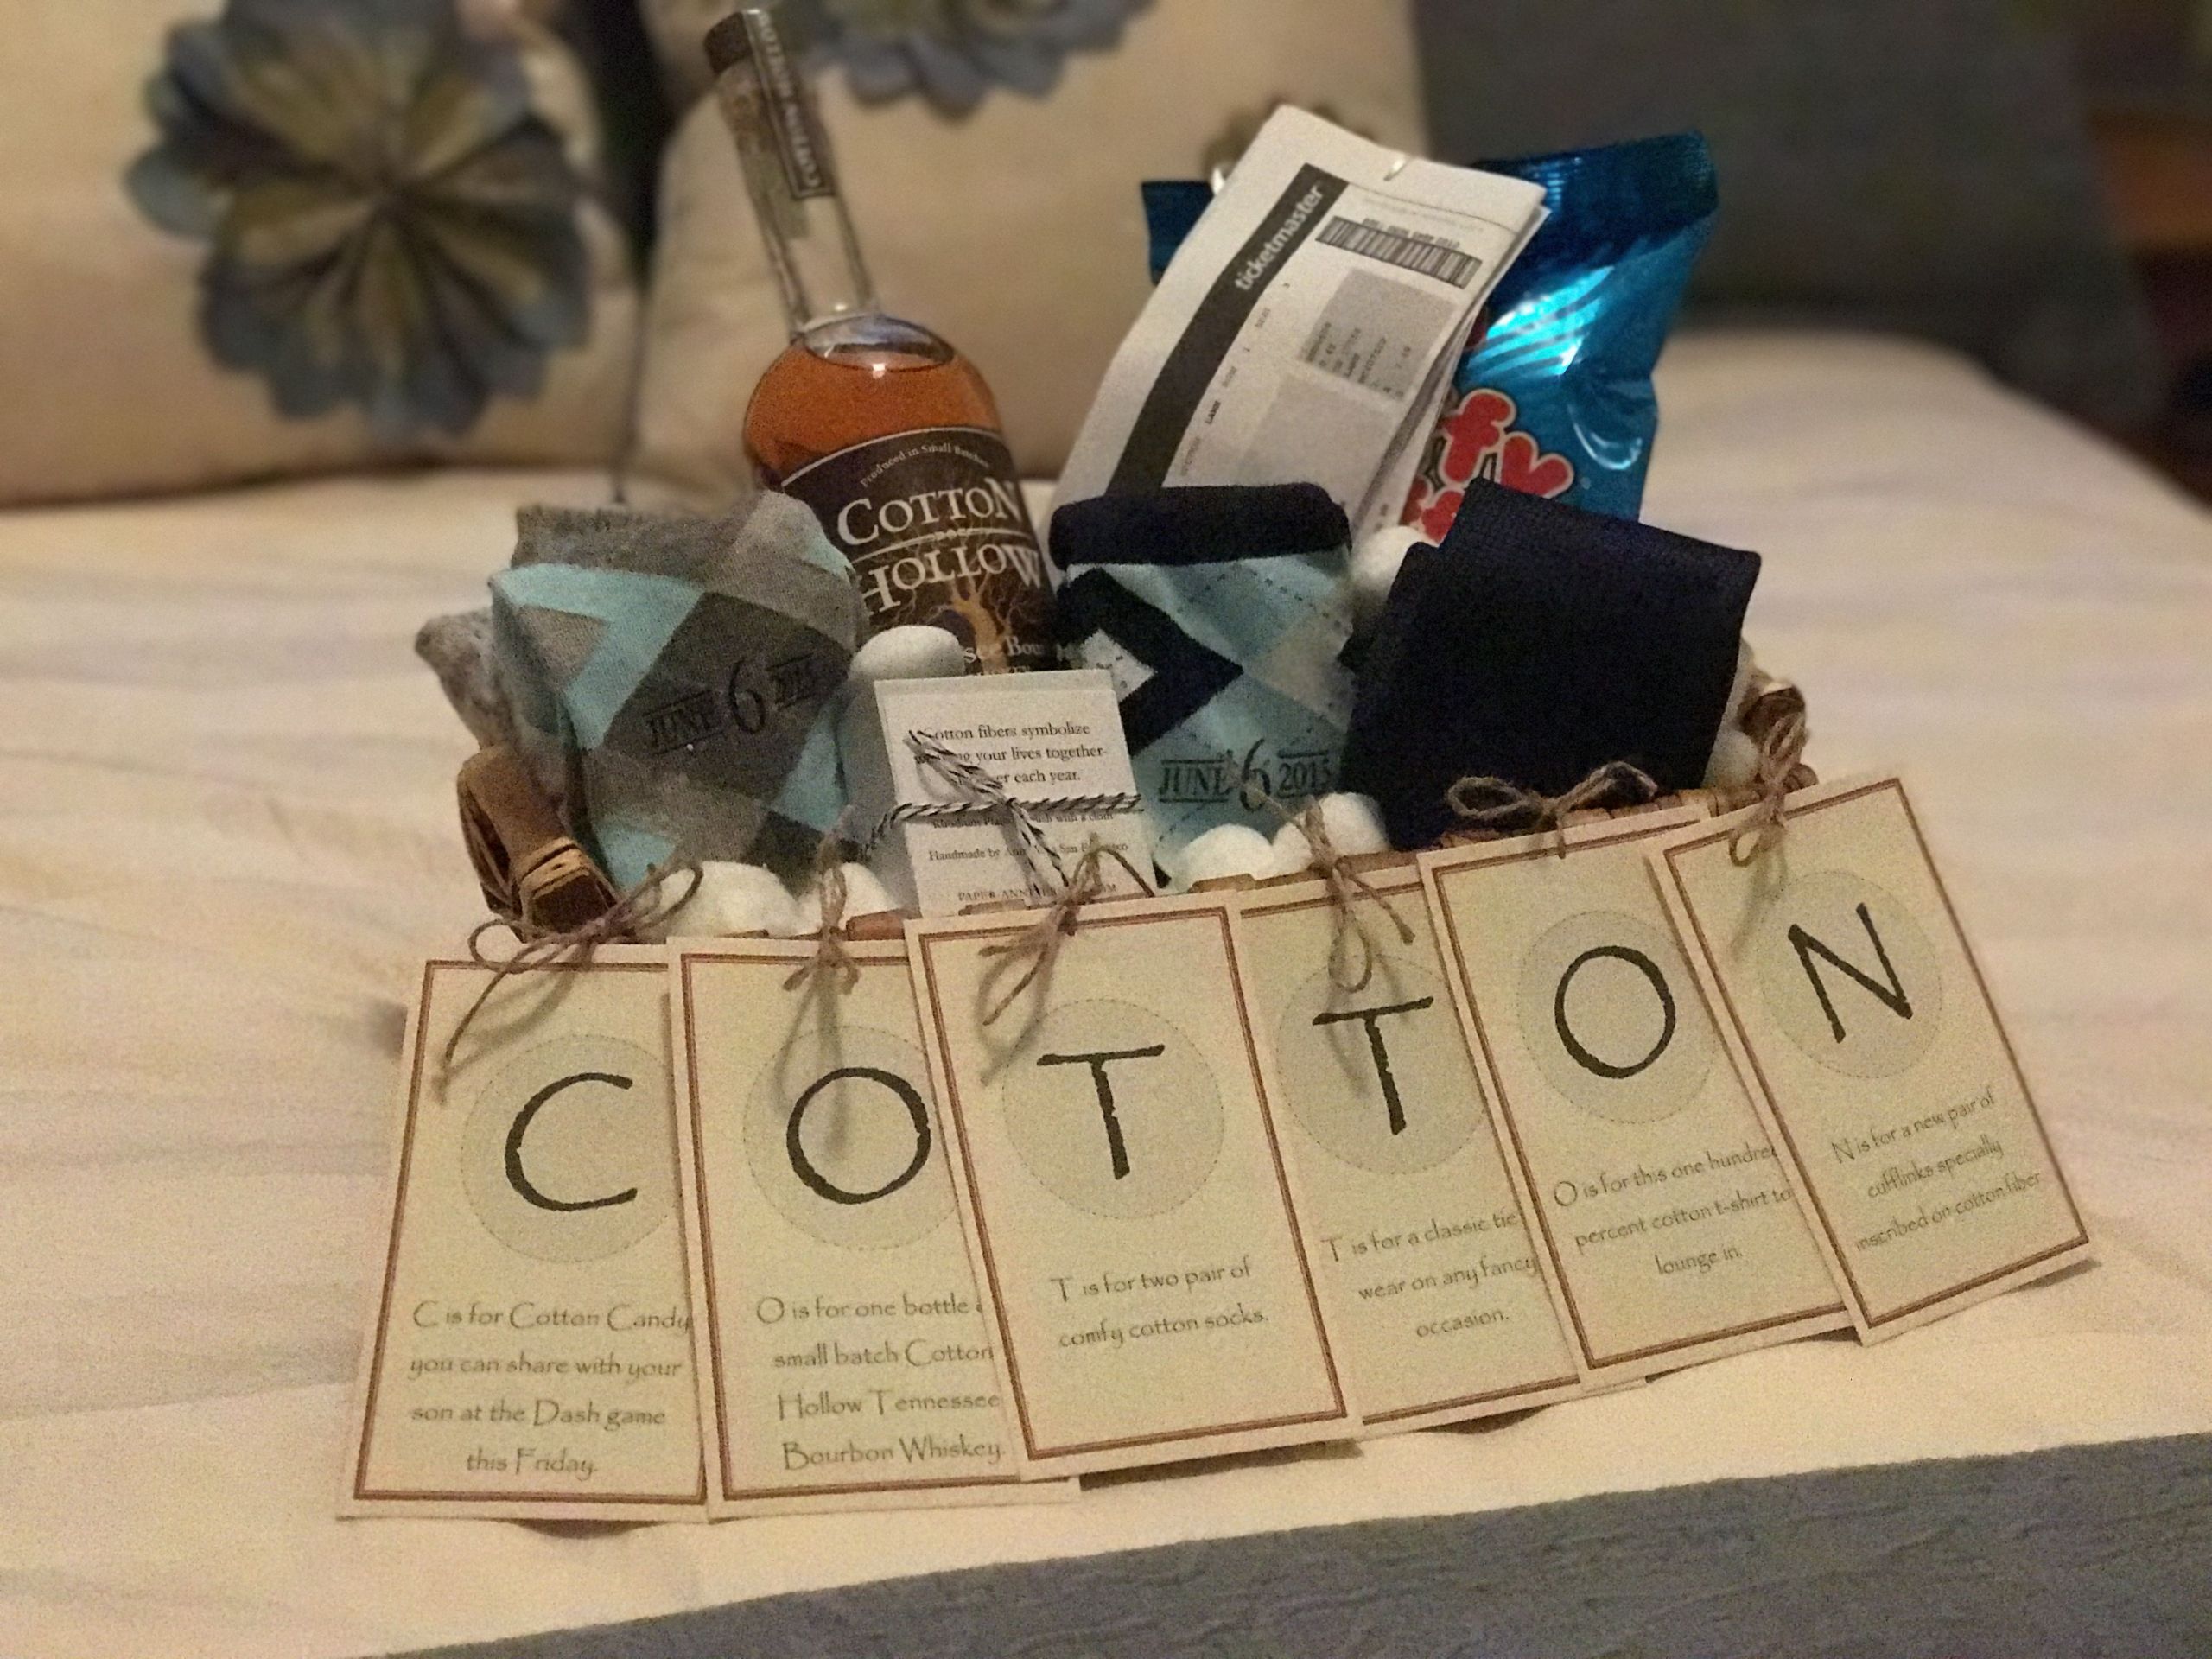 Fun Second Wedding Gift Ideas
 The "Cotton" Anniversary Gift for Him